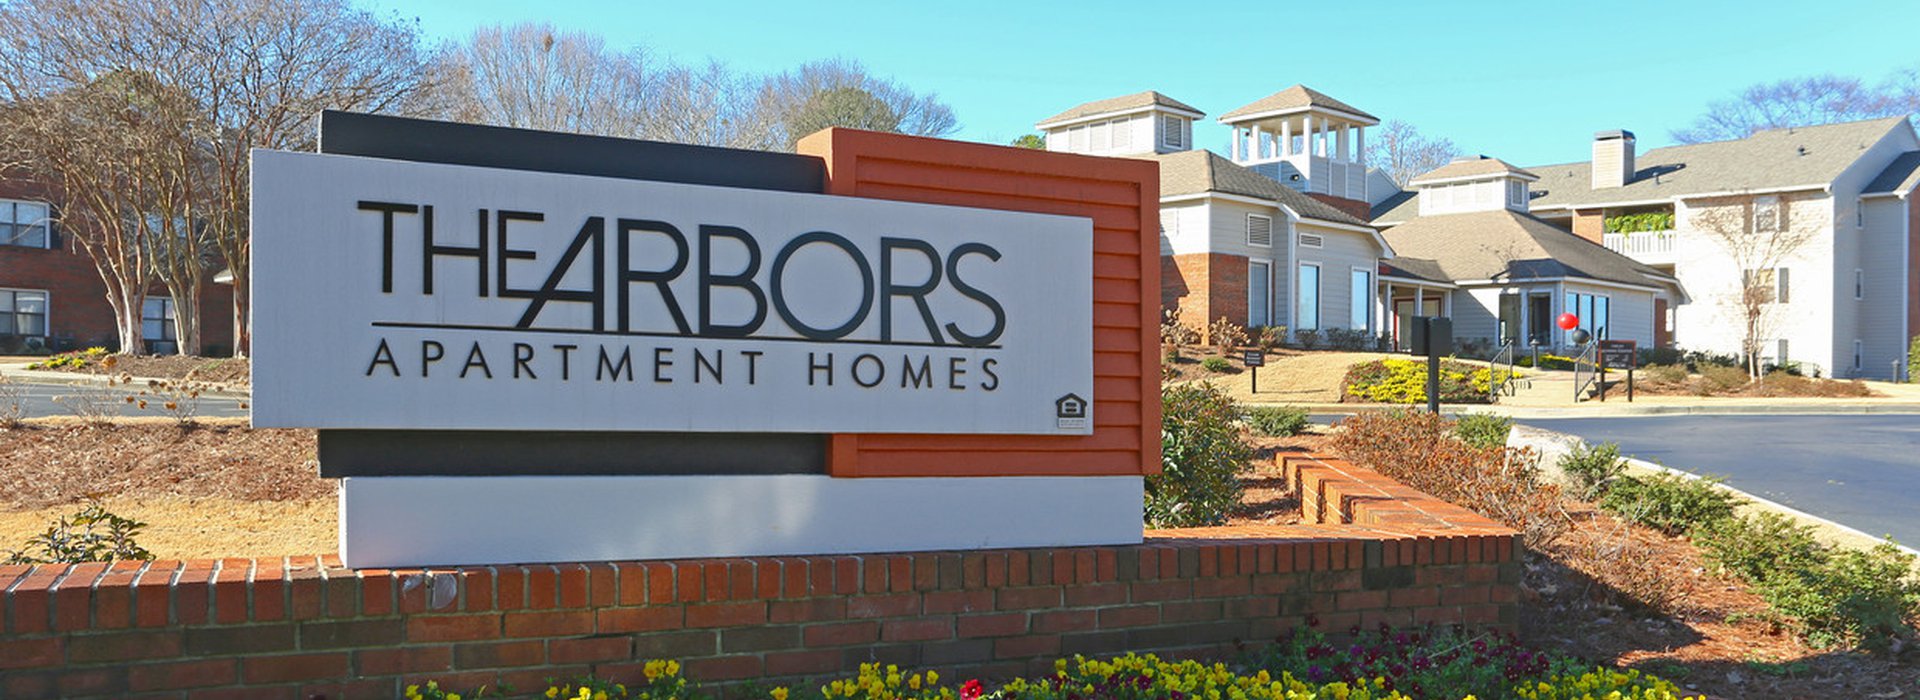 THE ARBORS APARTMENT   HOMES  building